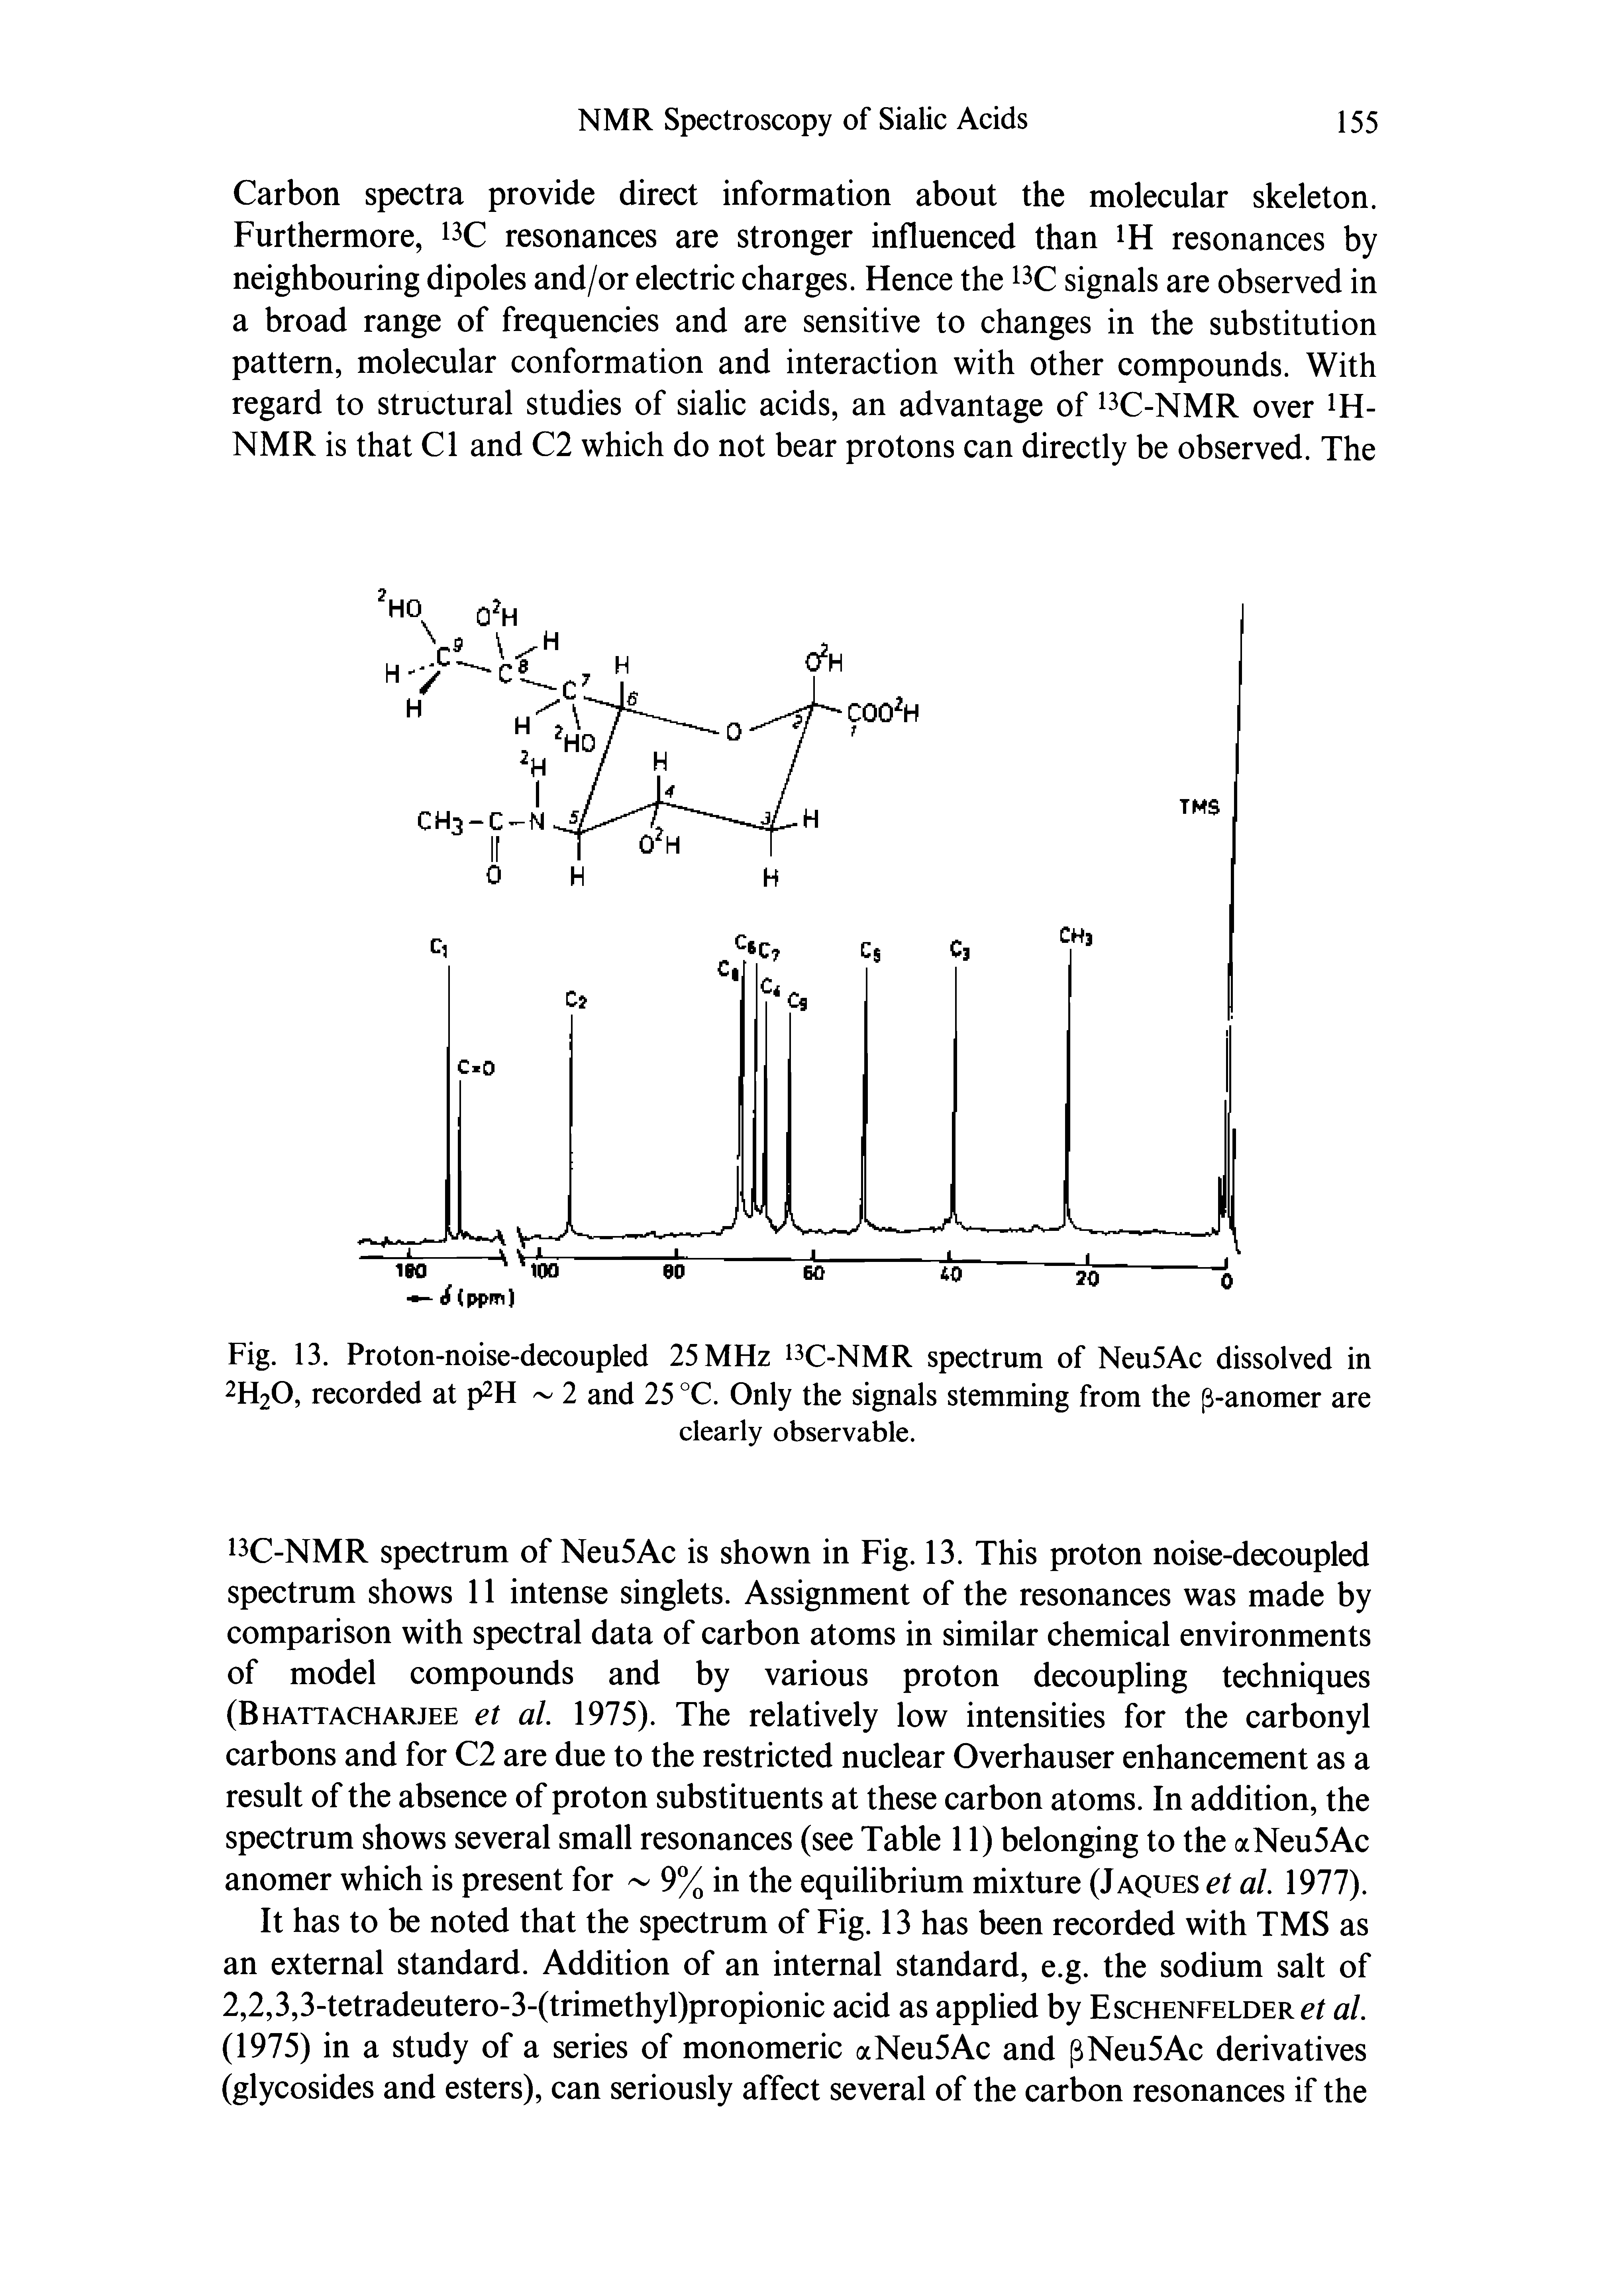 Fig. 13. Proton-noise-decoupled 25 MHz i C-NMR spectrum of Neu5Ac dissolved in 2H2O, recorded at p H 2 and 25 °C. Only the signals stemming from the p-anomer are...